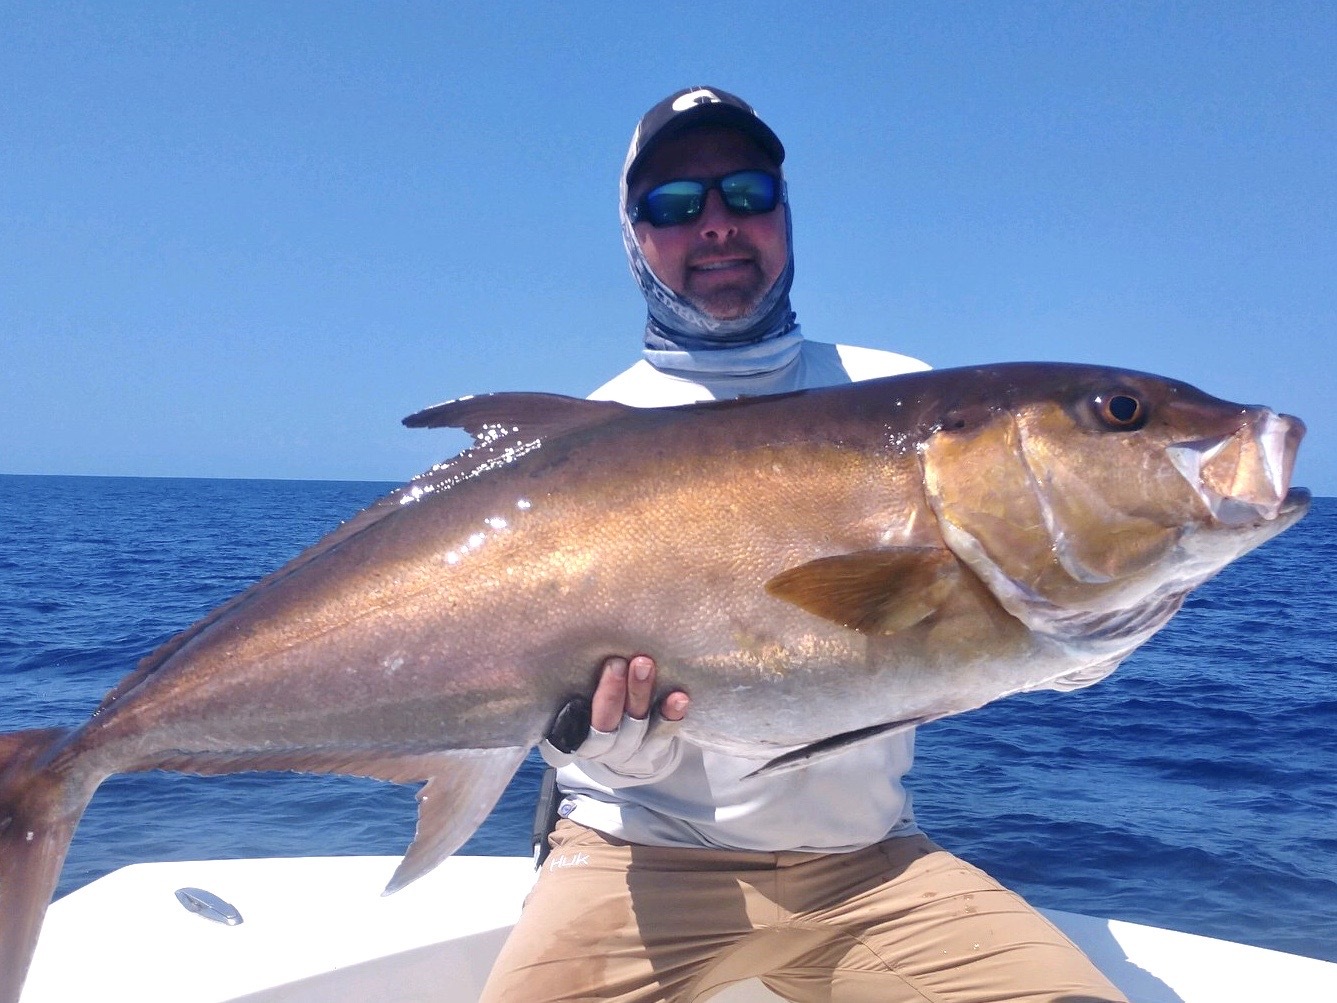 Chris Hatch tussled with this bruiser amberjack while fishing with a group of South Fork anglers in Panama last week.